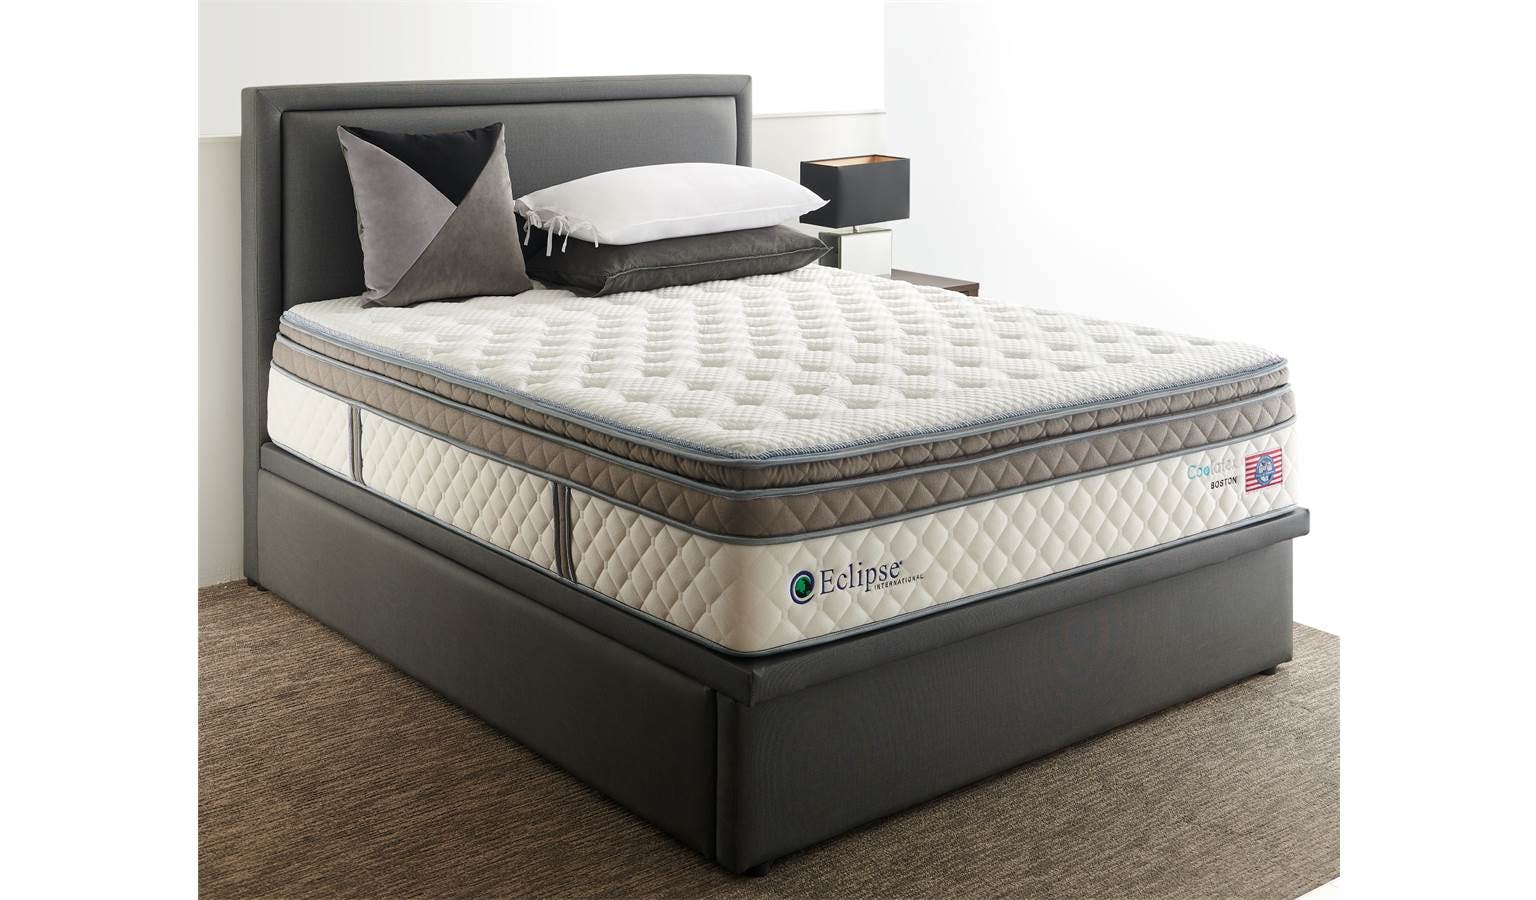 eclipse ortho spine mattress review